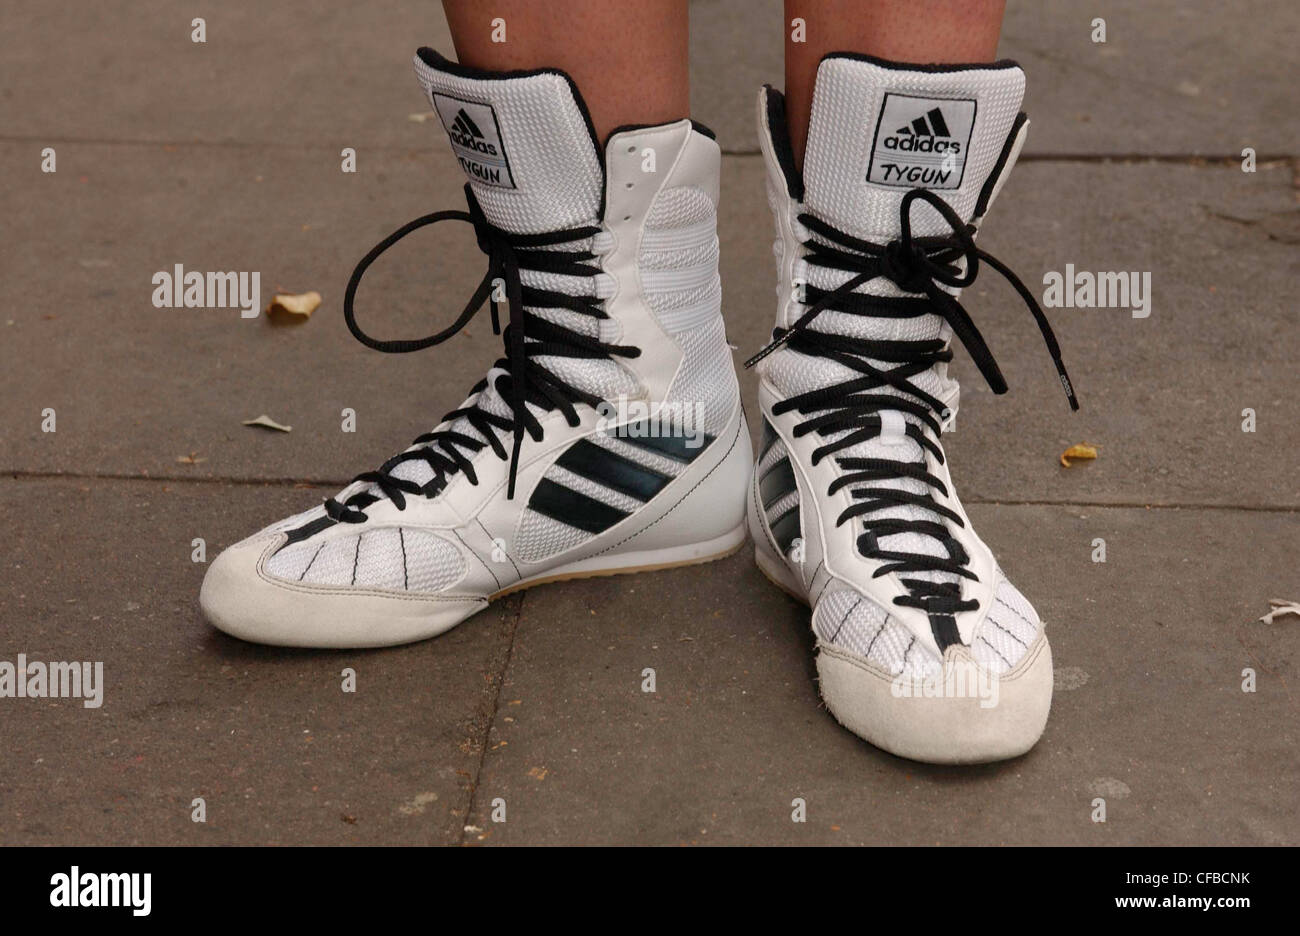 B London Street Fashion Cropped female feet wearing white Adidas Tygun  boots with black laces Stock Photo - Alamy